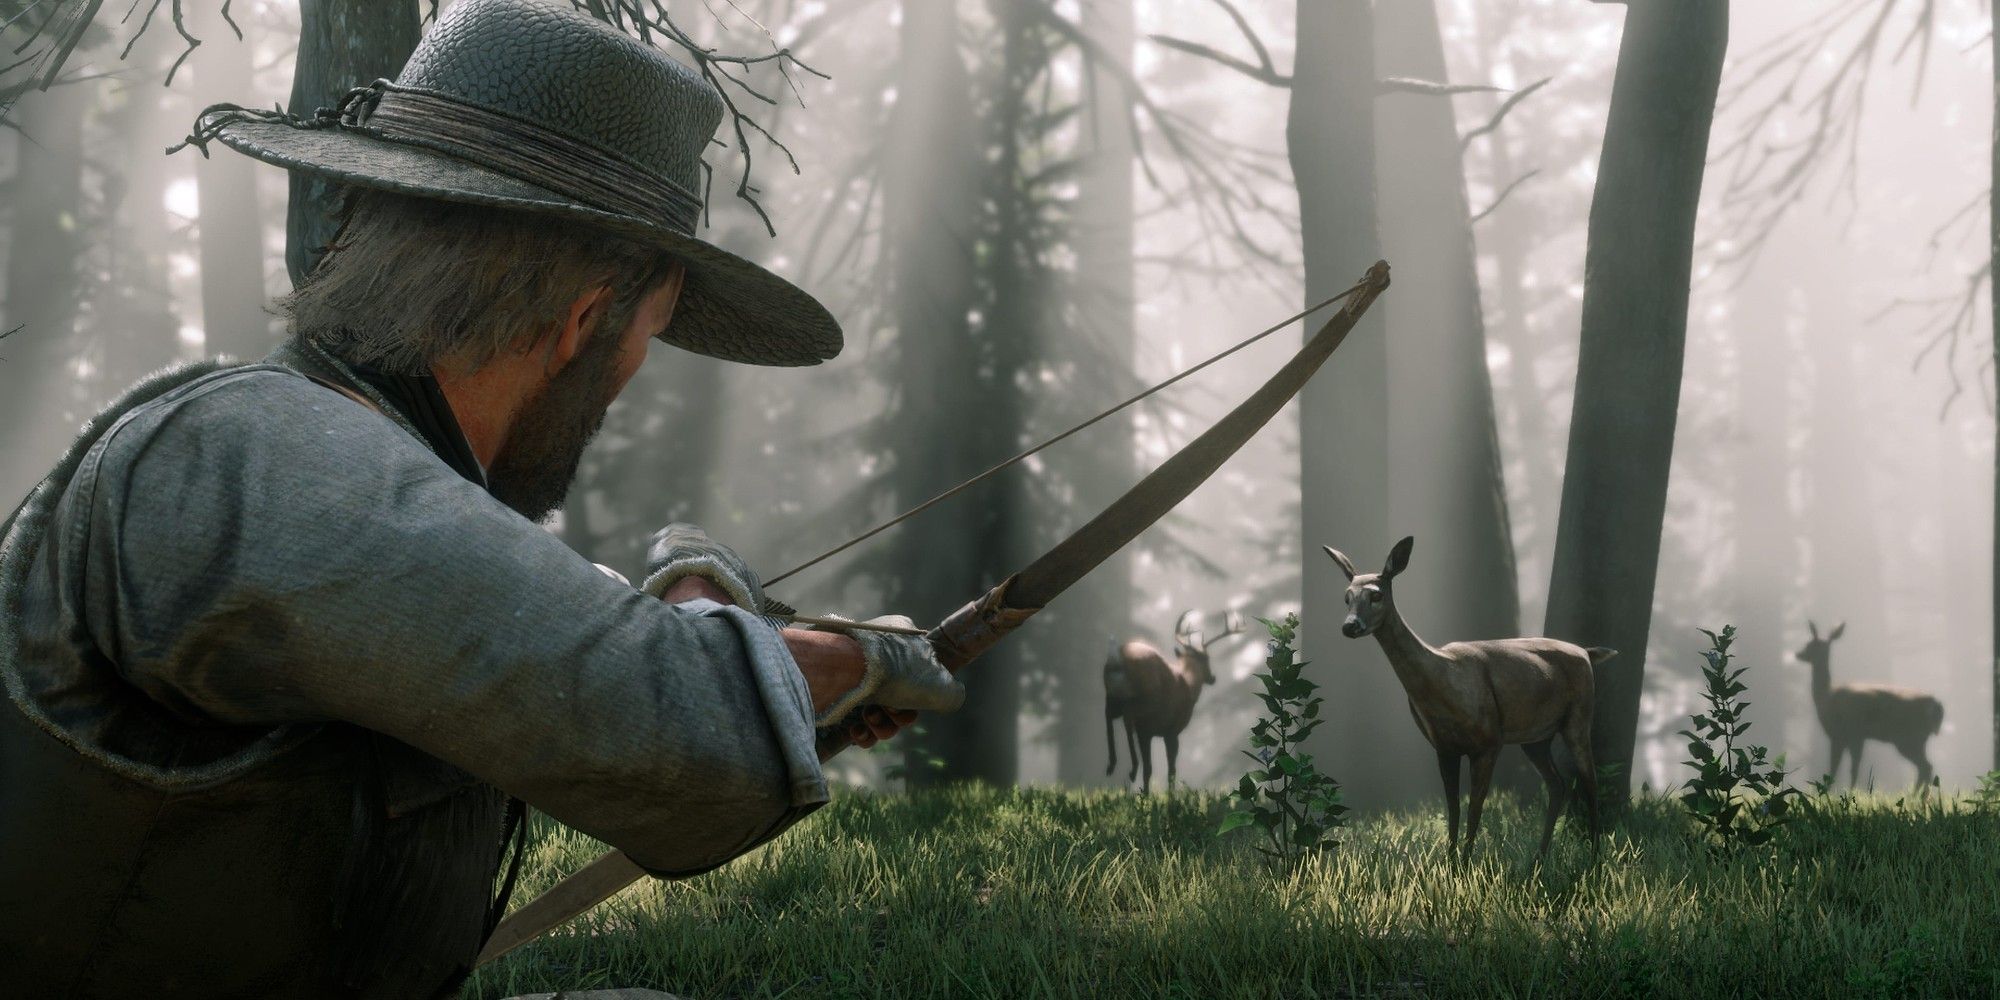 Arthur hunts deer with a bow and arrow in Red Dead Redemption 2